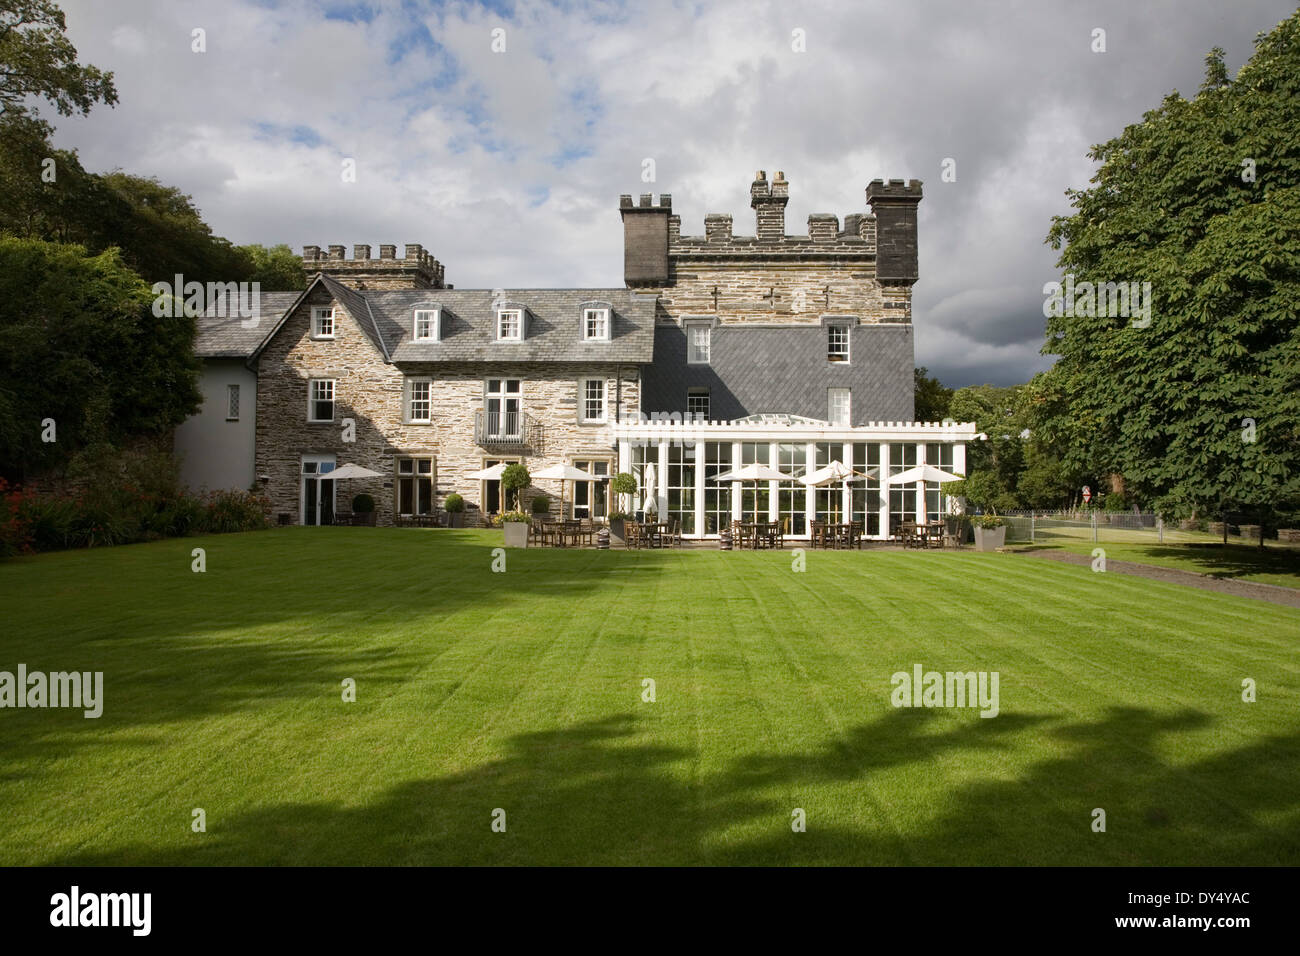 Portmeirion Castle hotel restaurant and lawn garden. Portmeirion, North Wales, United Kingdom Stock Photo